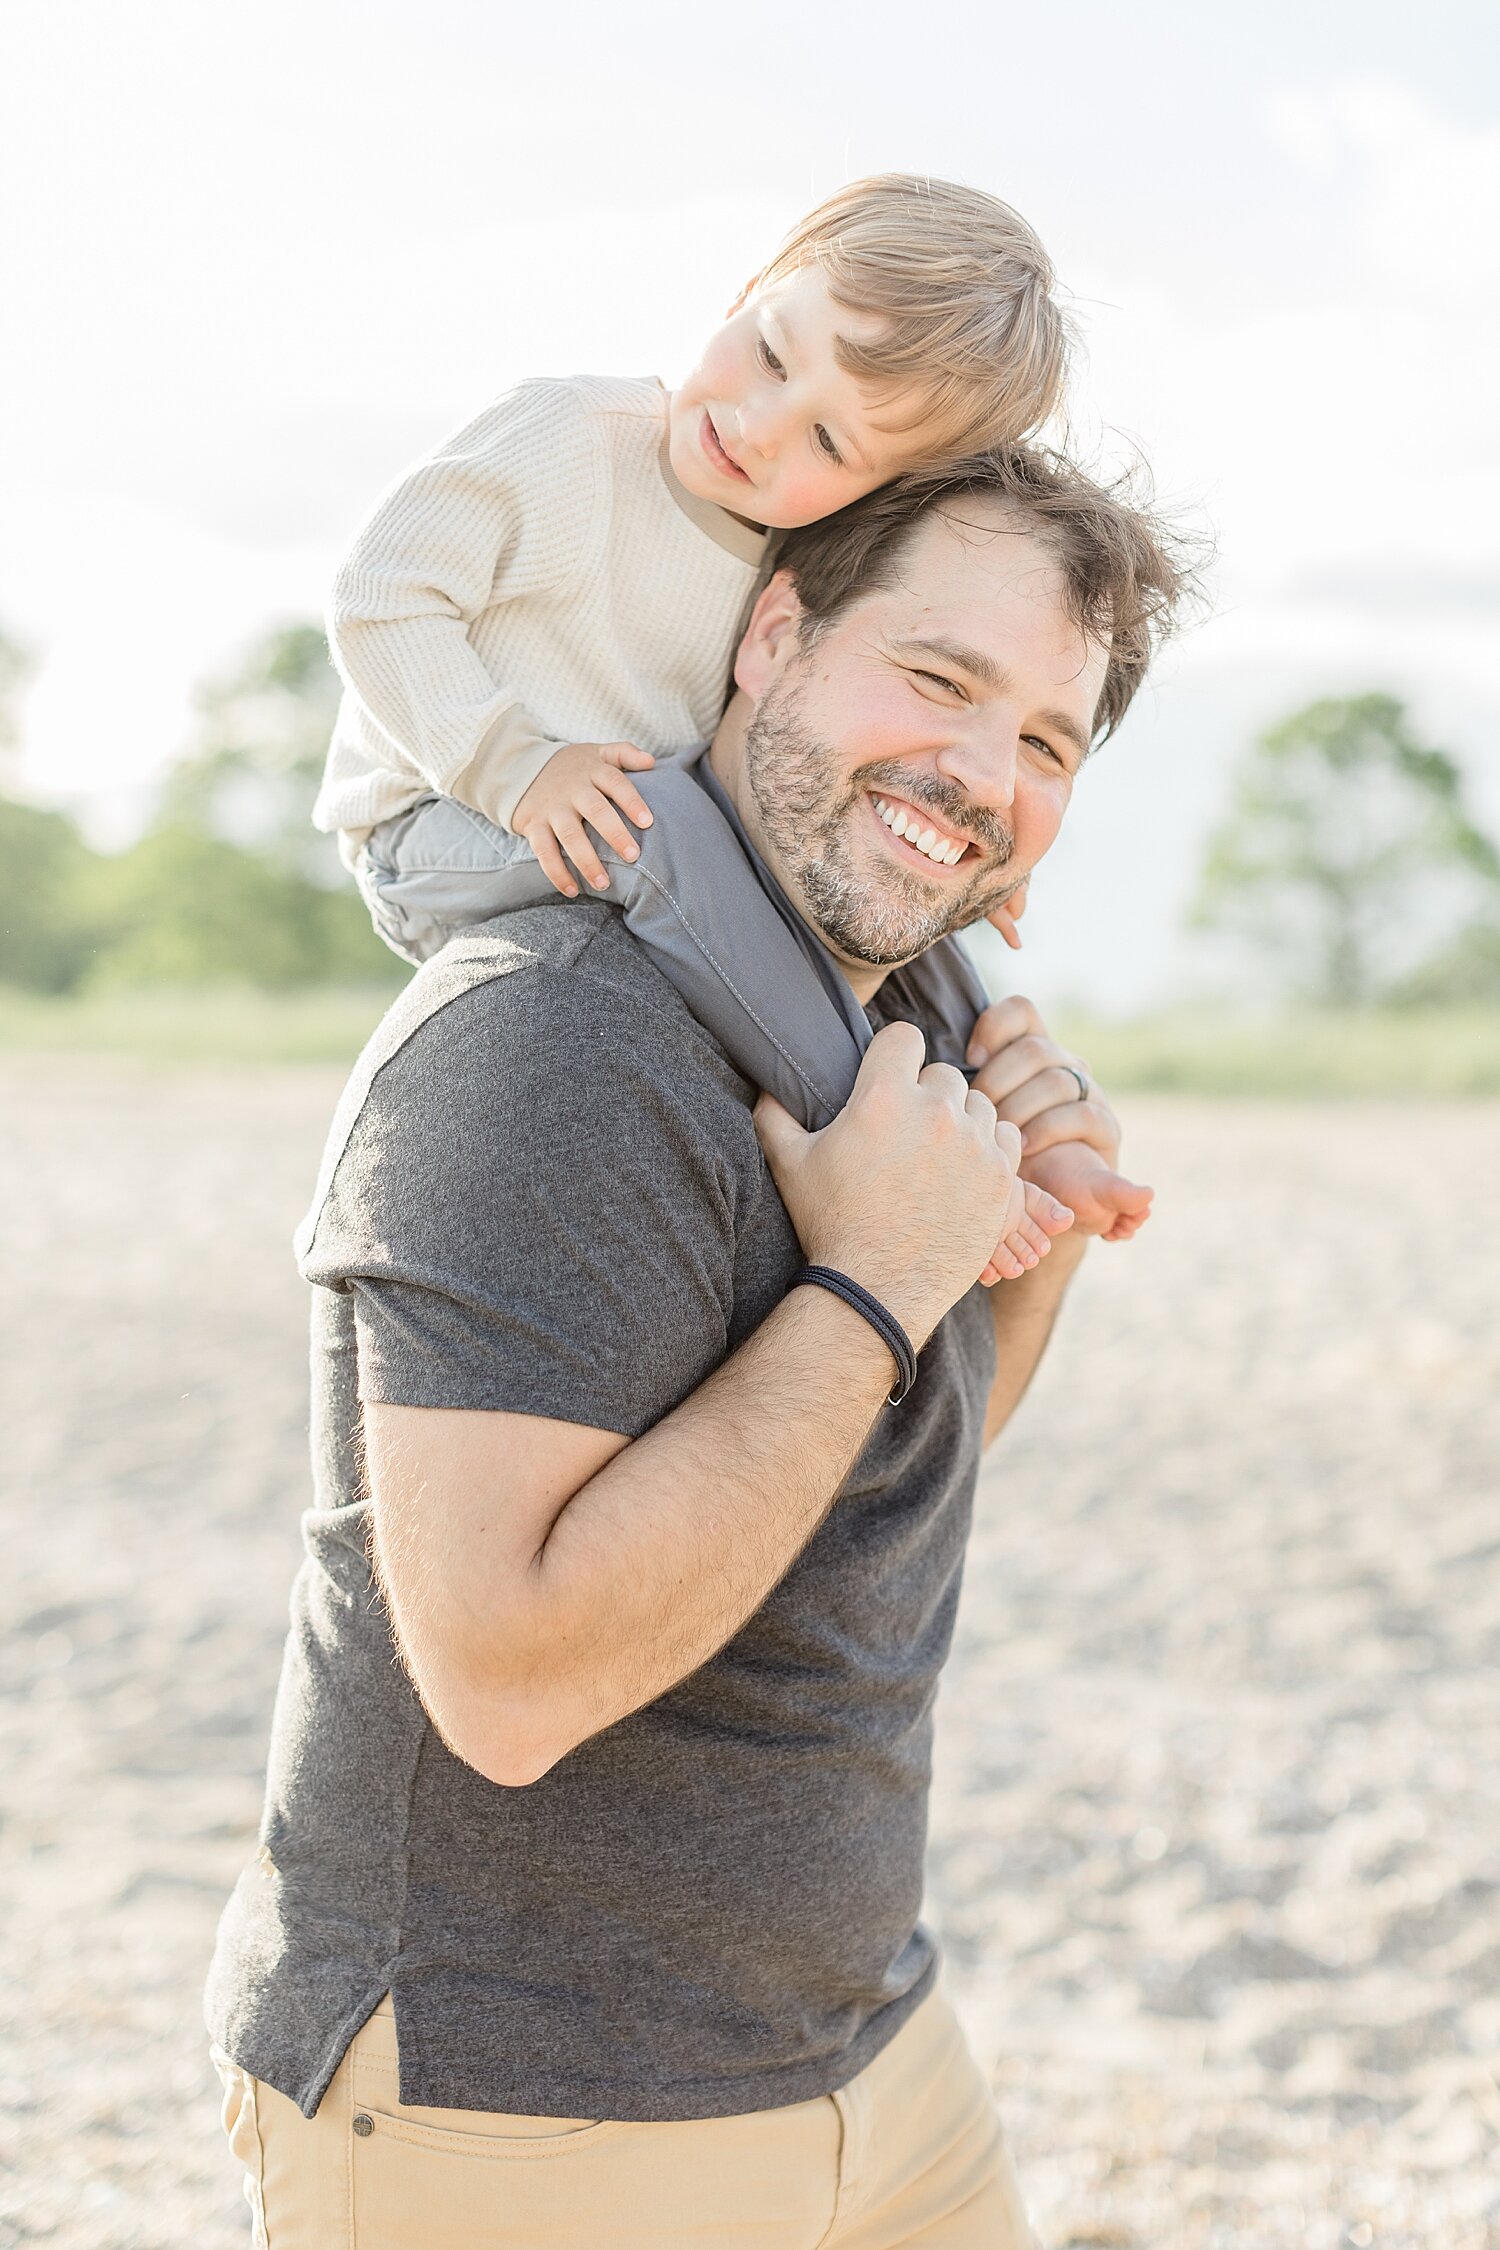 Toddler boy riding on Dad's shoulders | Kristin Wood Photography